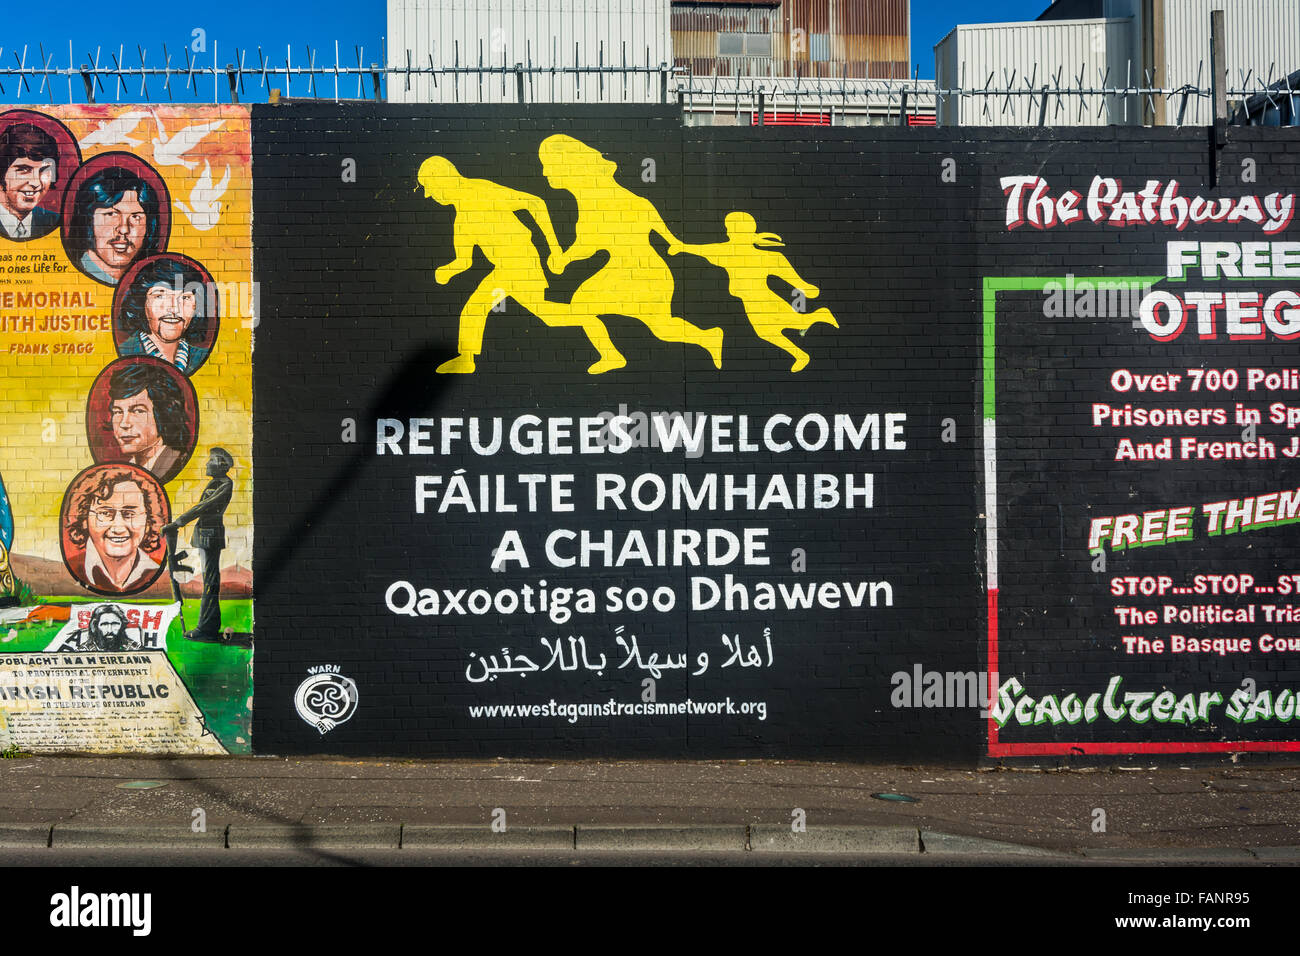 Refugees Welcome mural at International Wall on Belfast's Falls Road. With Irish gaelic text. Stock Photo